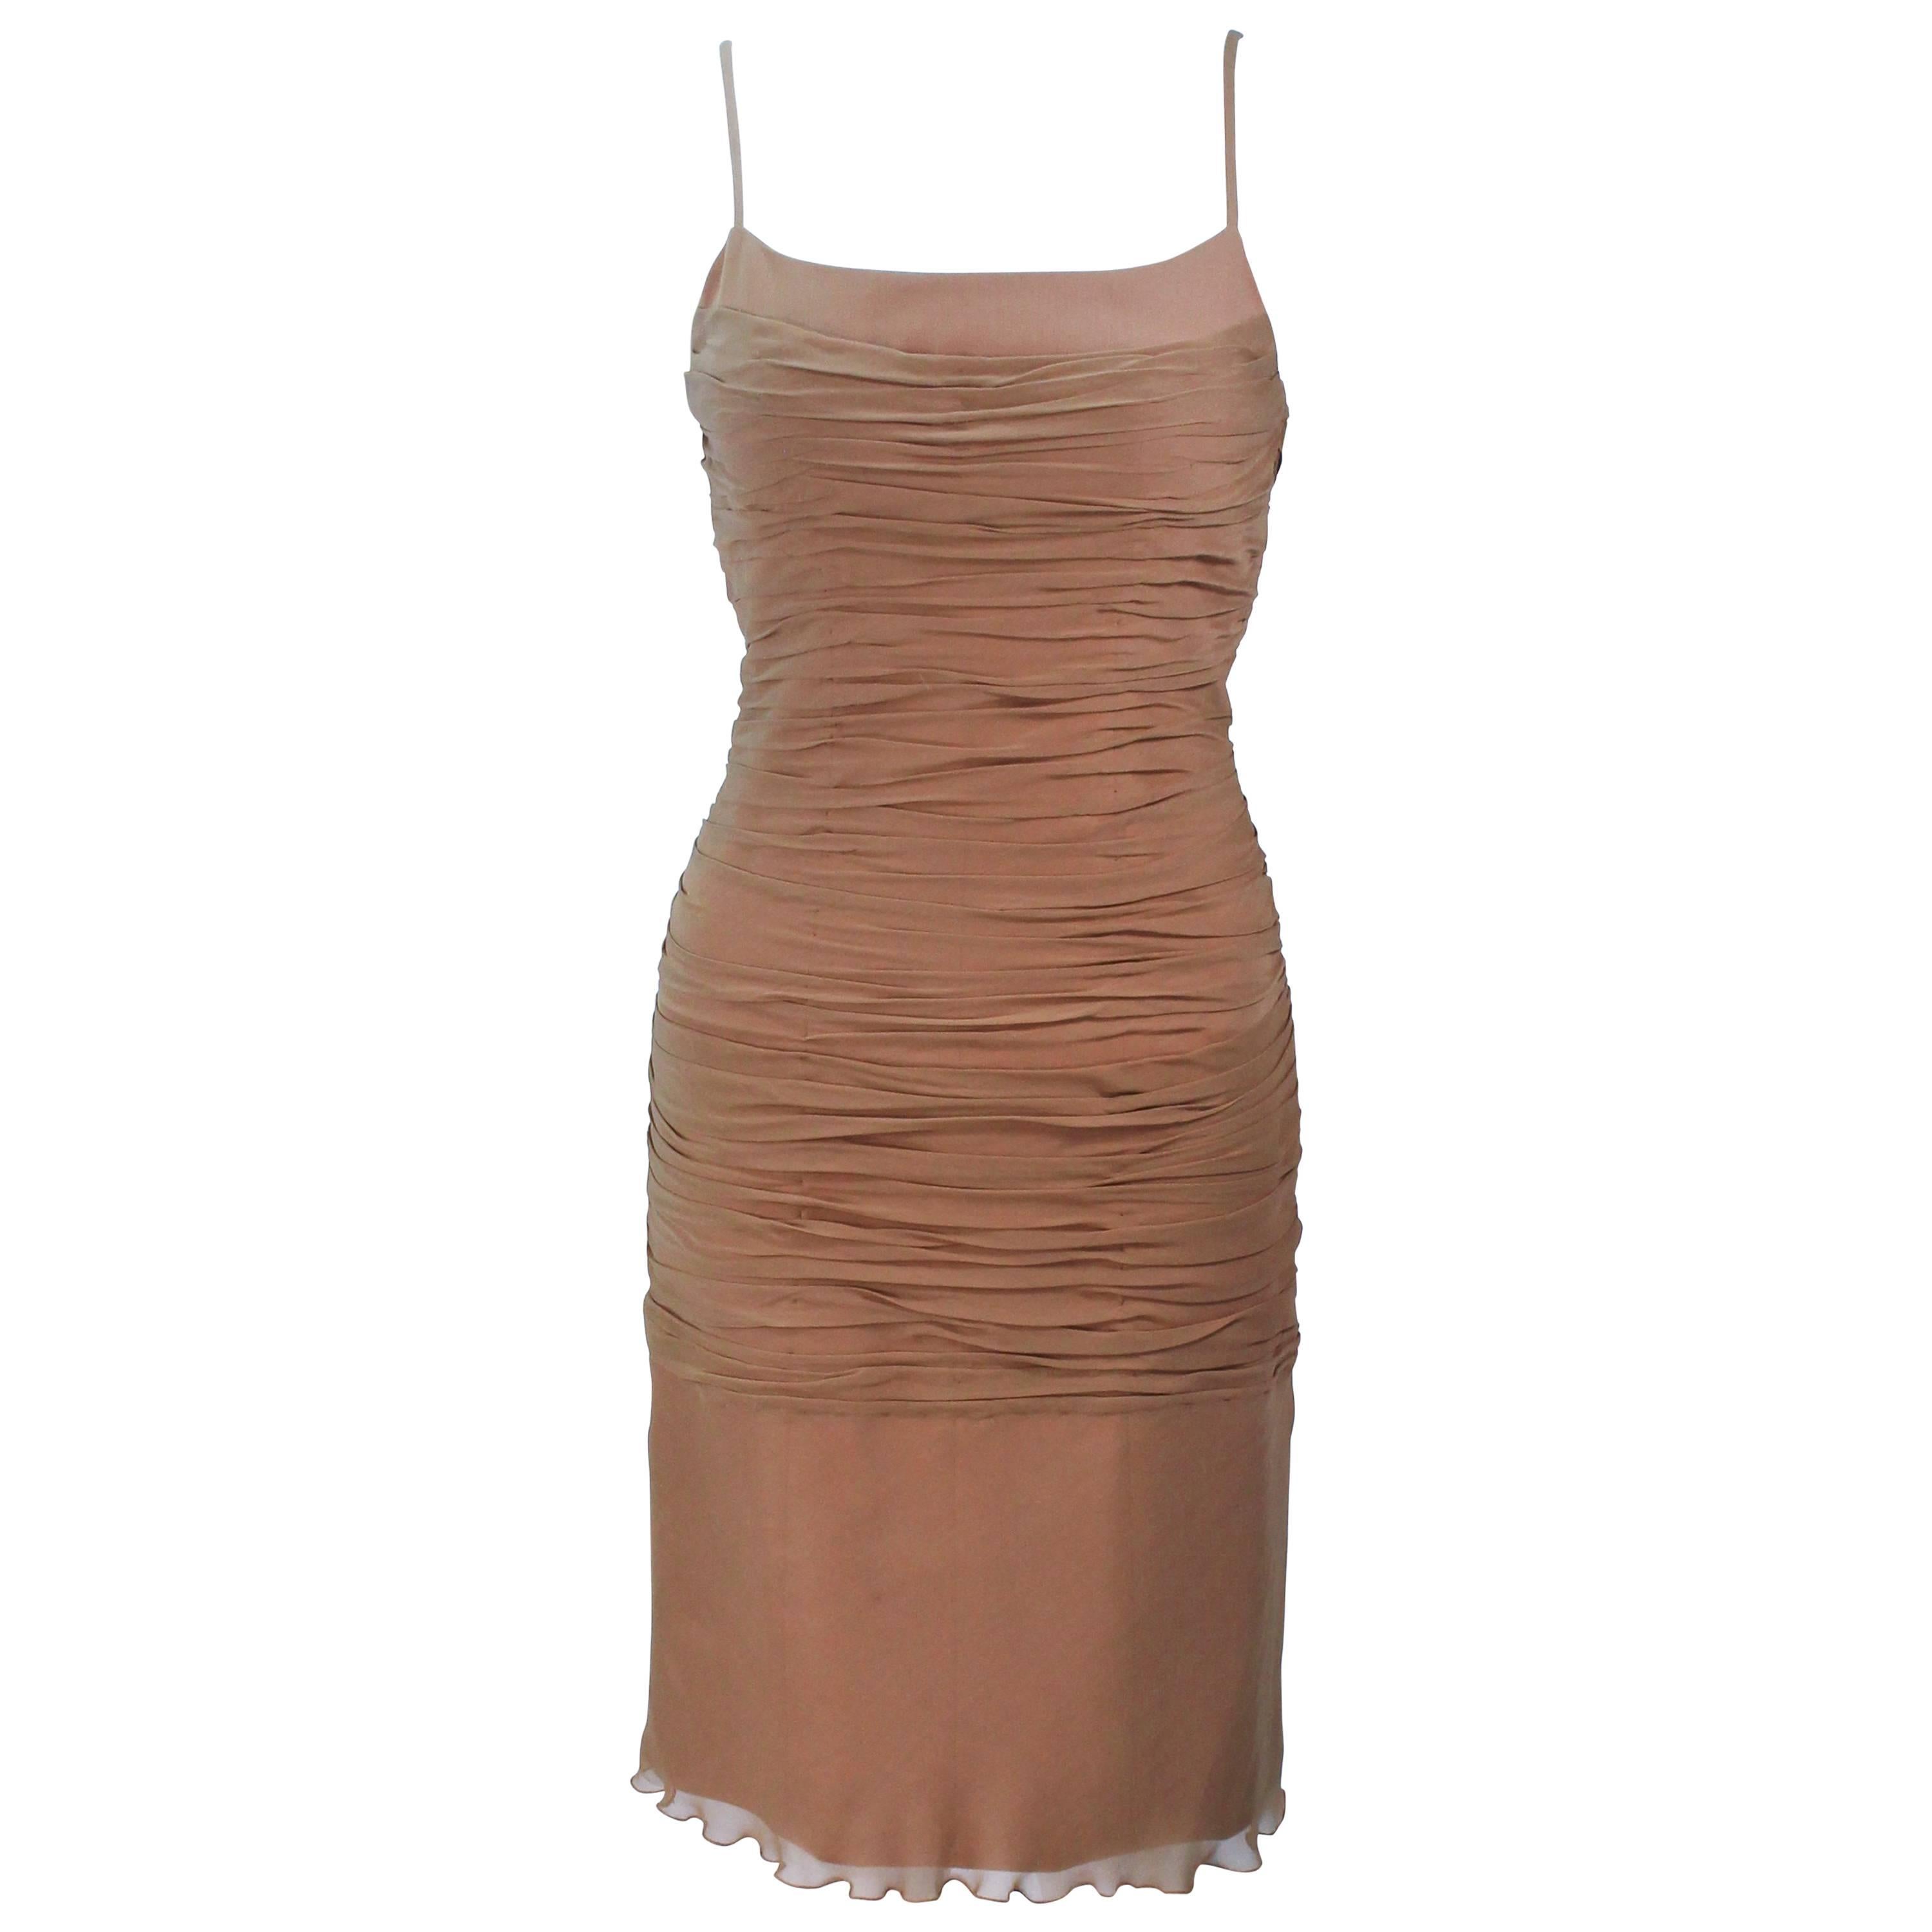 GALANOS Nude Silk Ruched Chiffon Cocktail Dress Size 6 For Sale